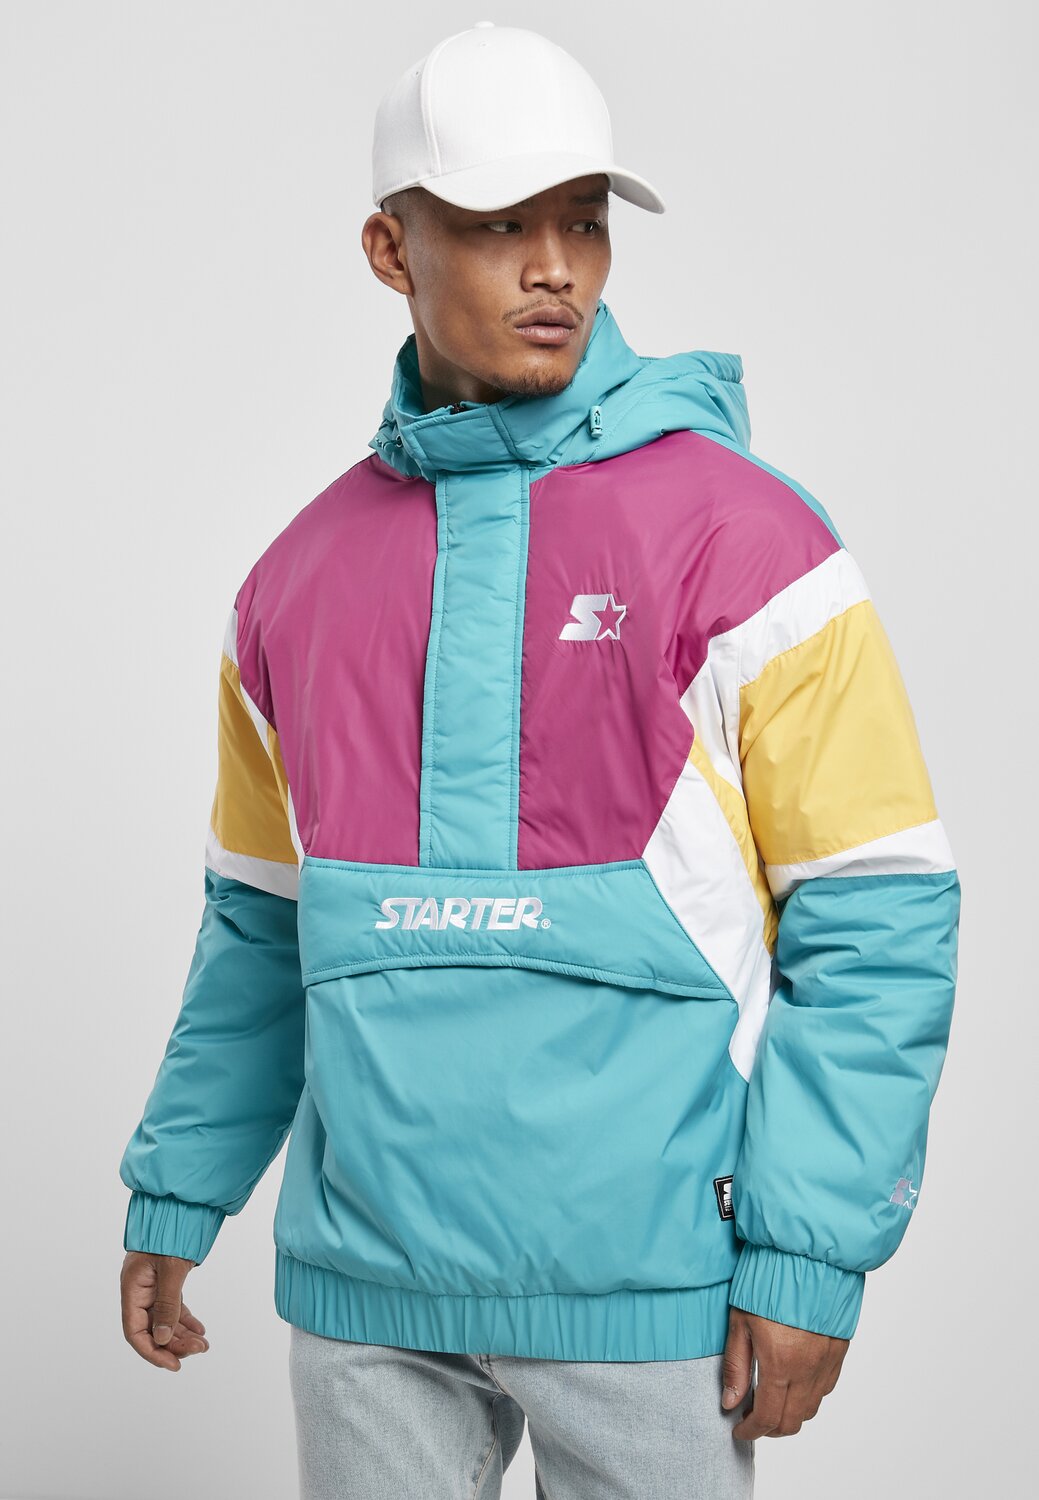 Starter jacket turquoise blue/pink/yellow/white | MAXISCOOT